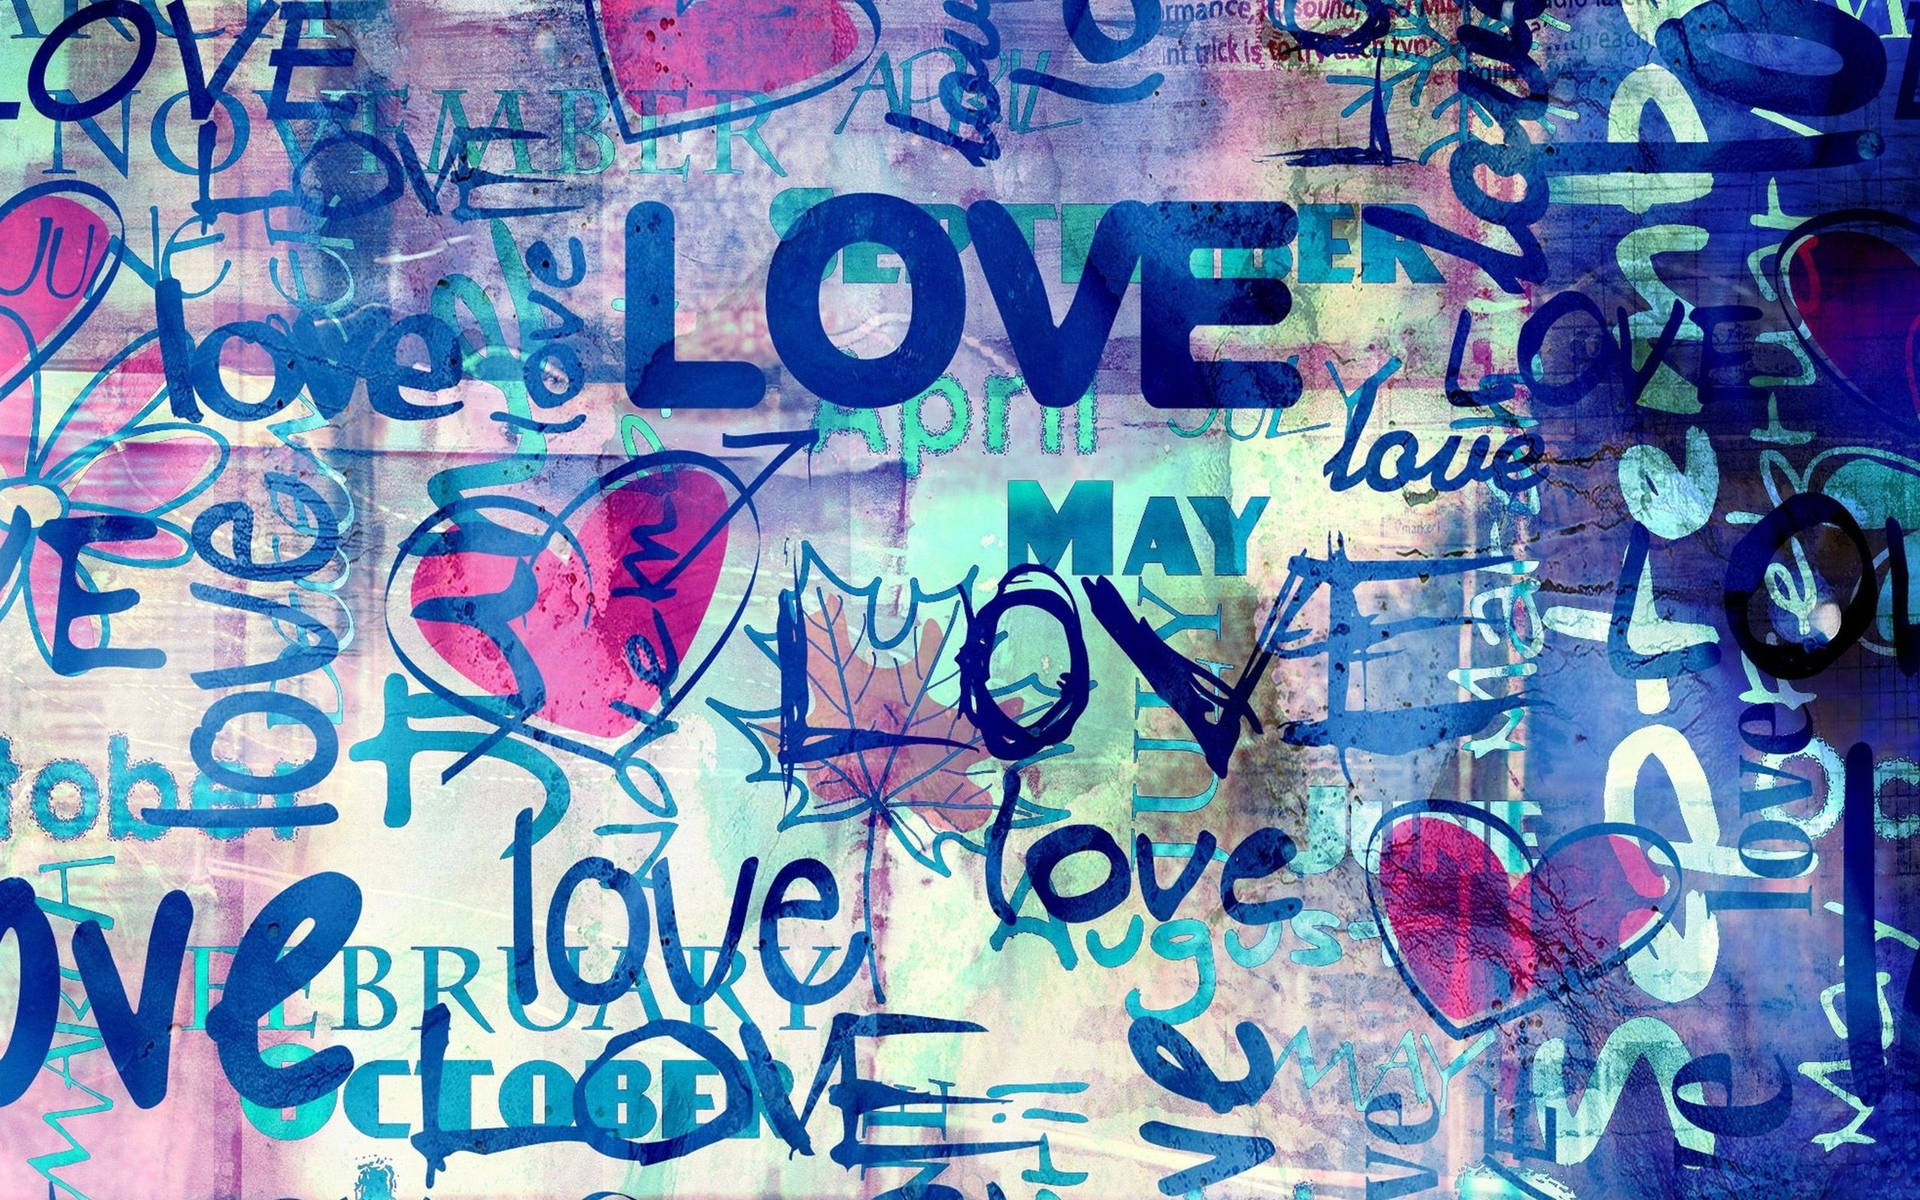 Blue-themed wallpaper of graffiti about love.